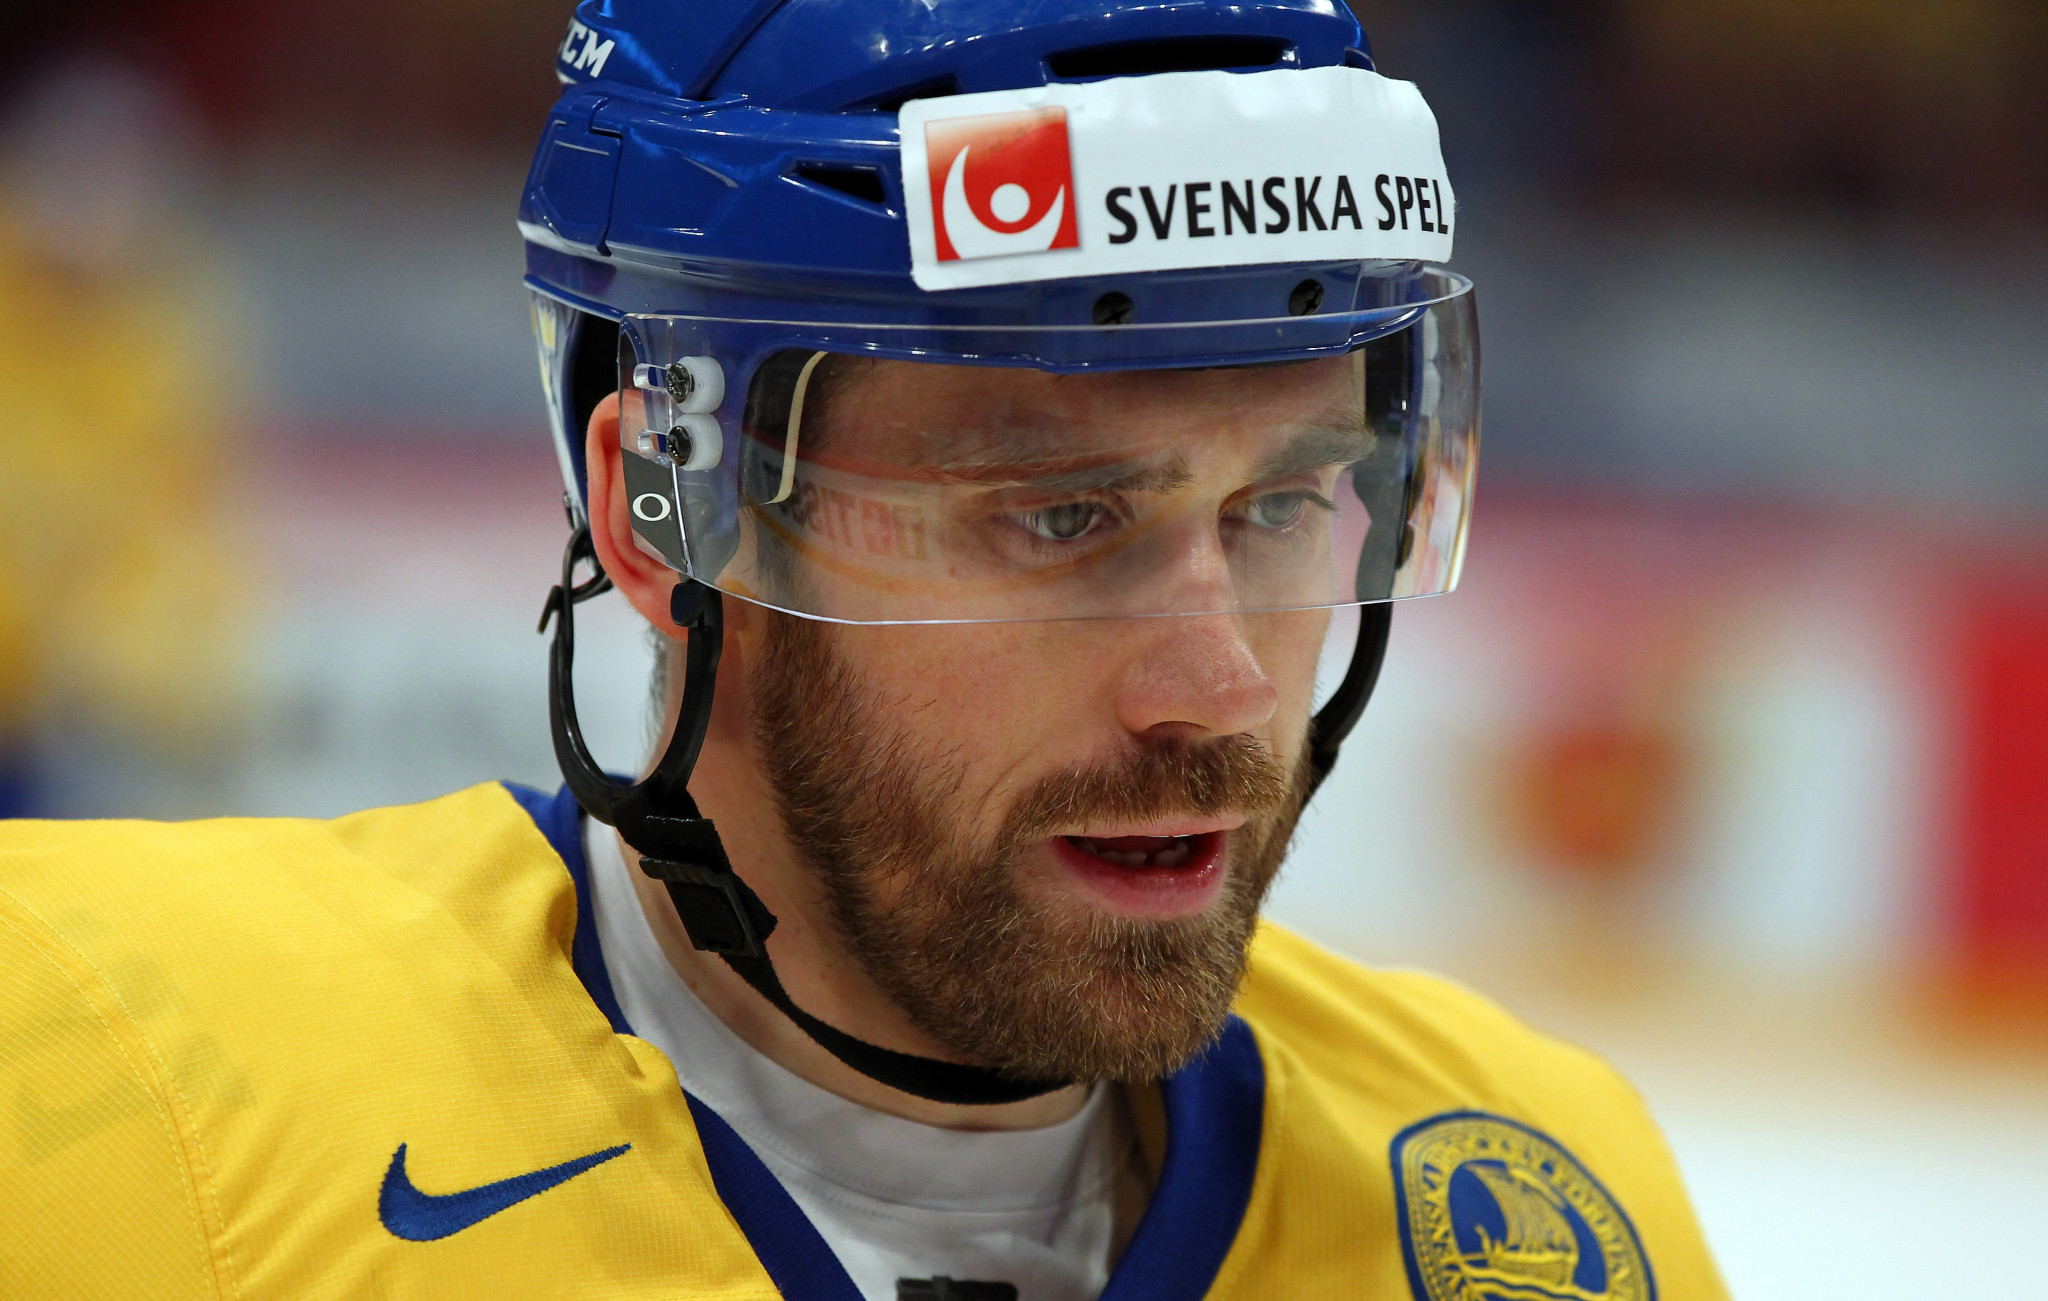 Swedish ice hockey legend Henrik Zetterberg has announced his retirement from the sport due to a back injury ©Getty Images